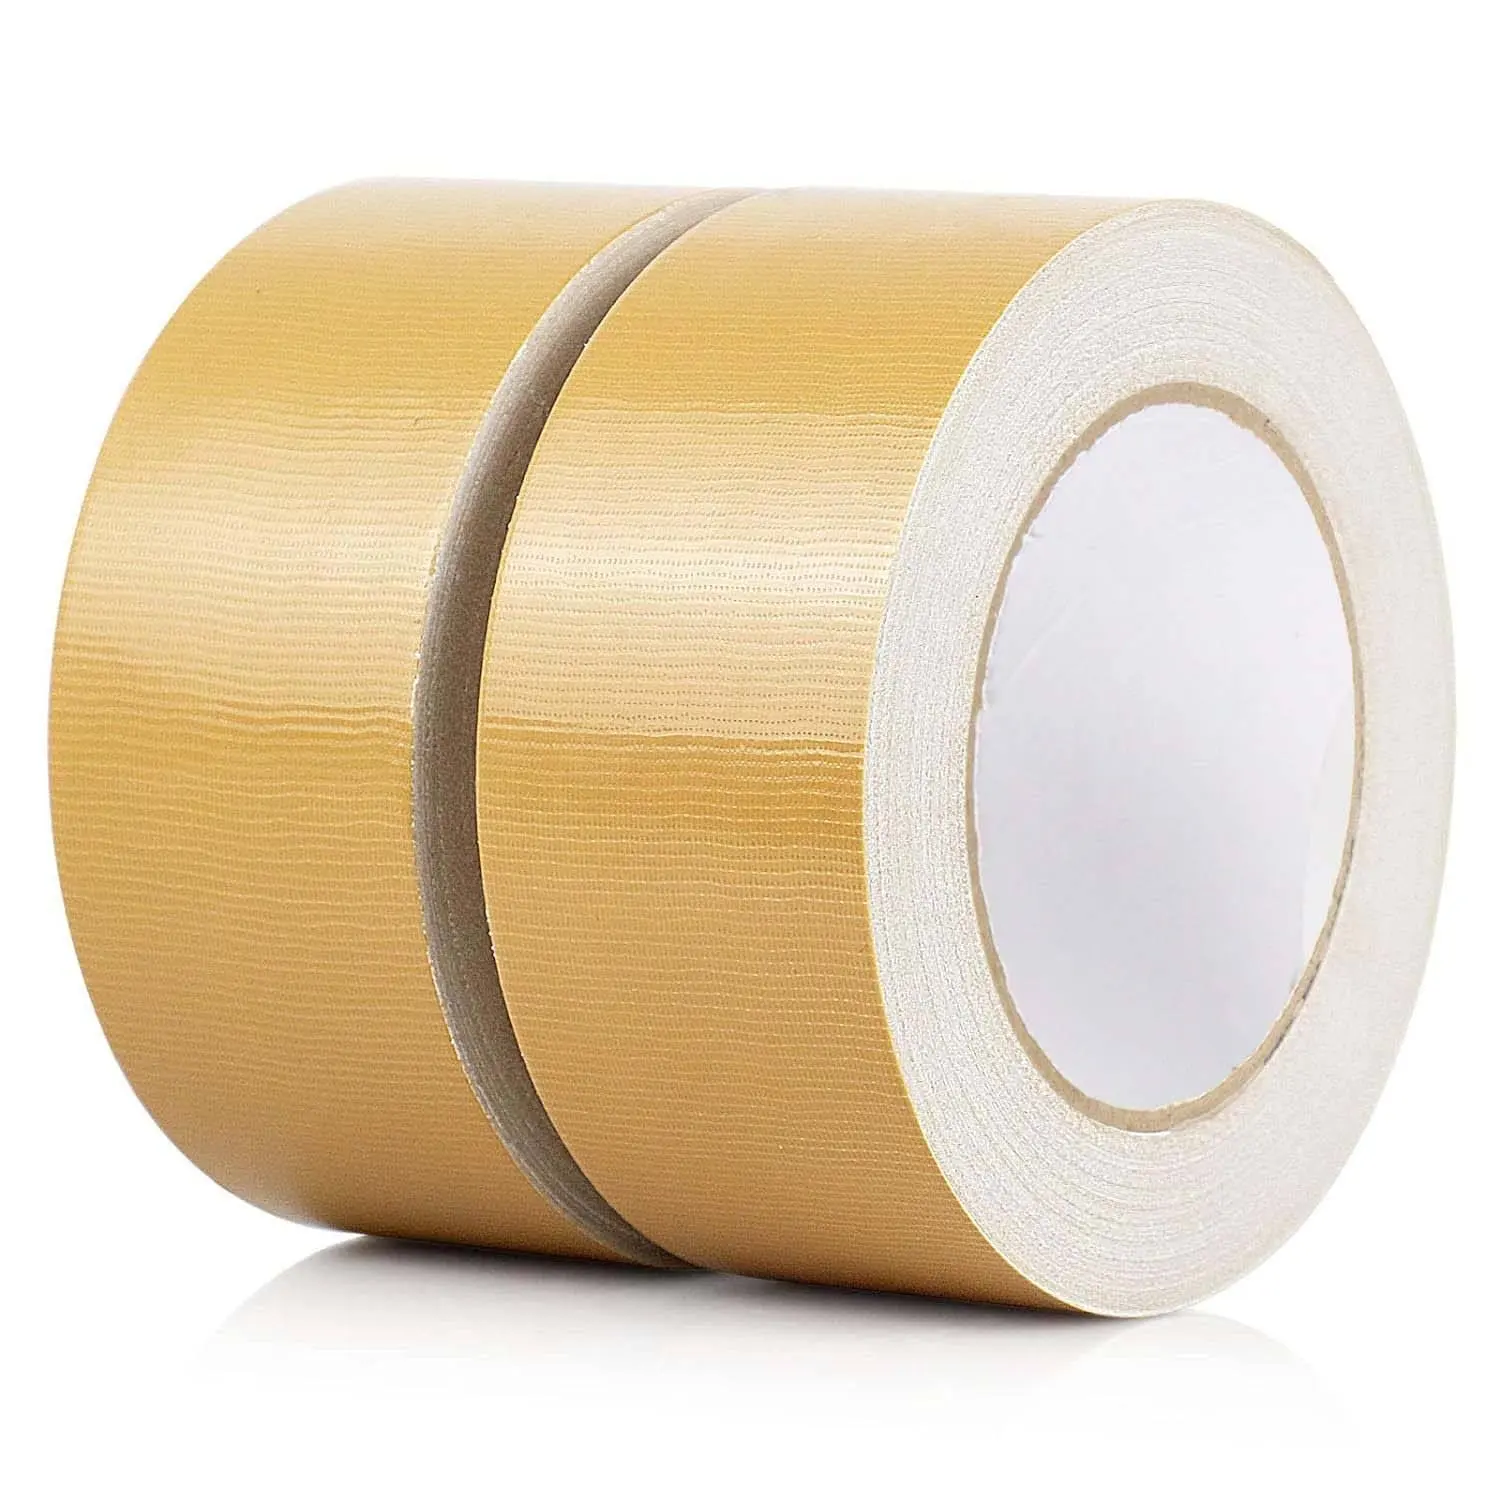 Adhesive Fabric 50Mm Waterproof Single Sided Seal Heavy Duty 27Mesh Manufacture Cloth Duct Tape